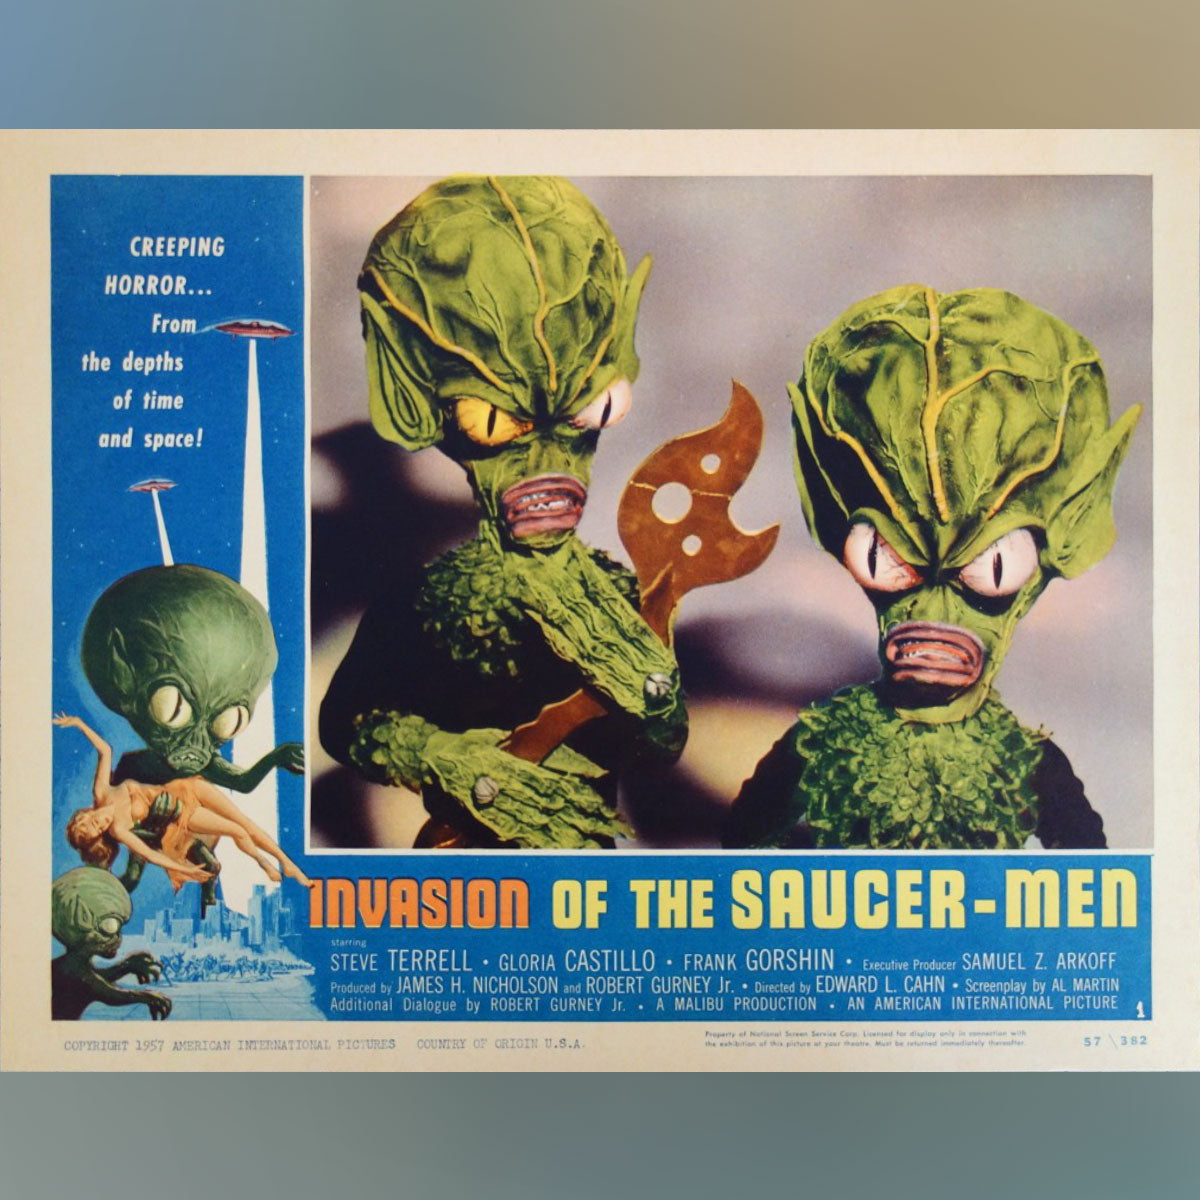 Invasion of The Saucer Men (1957)